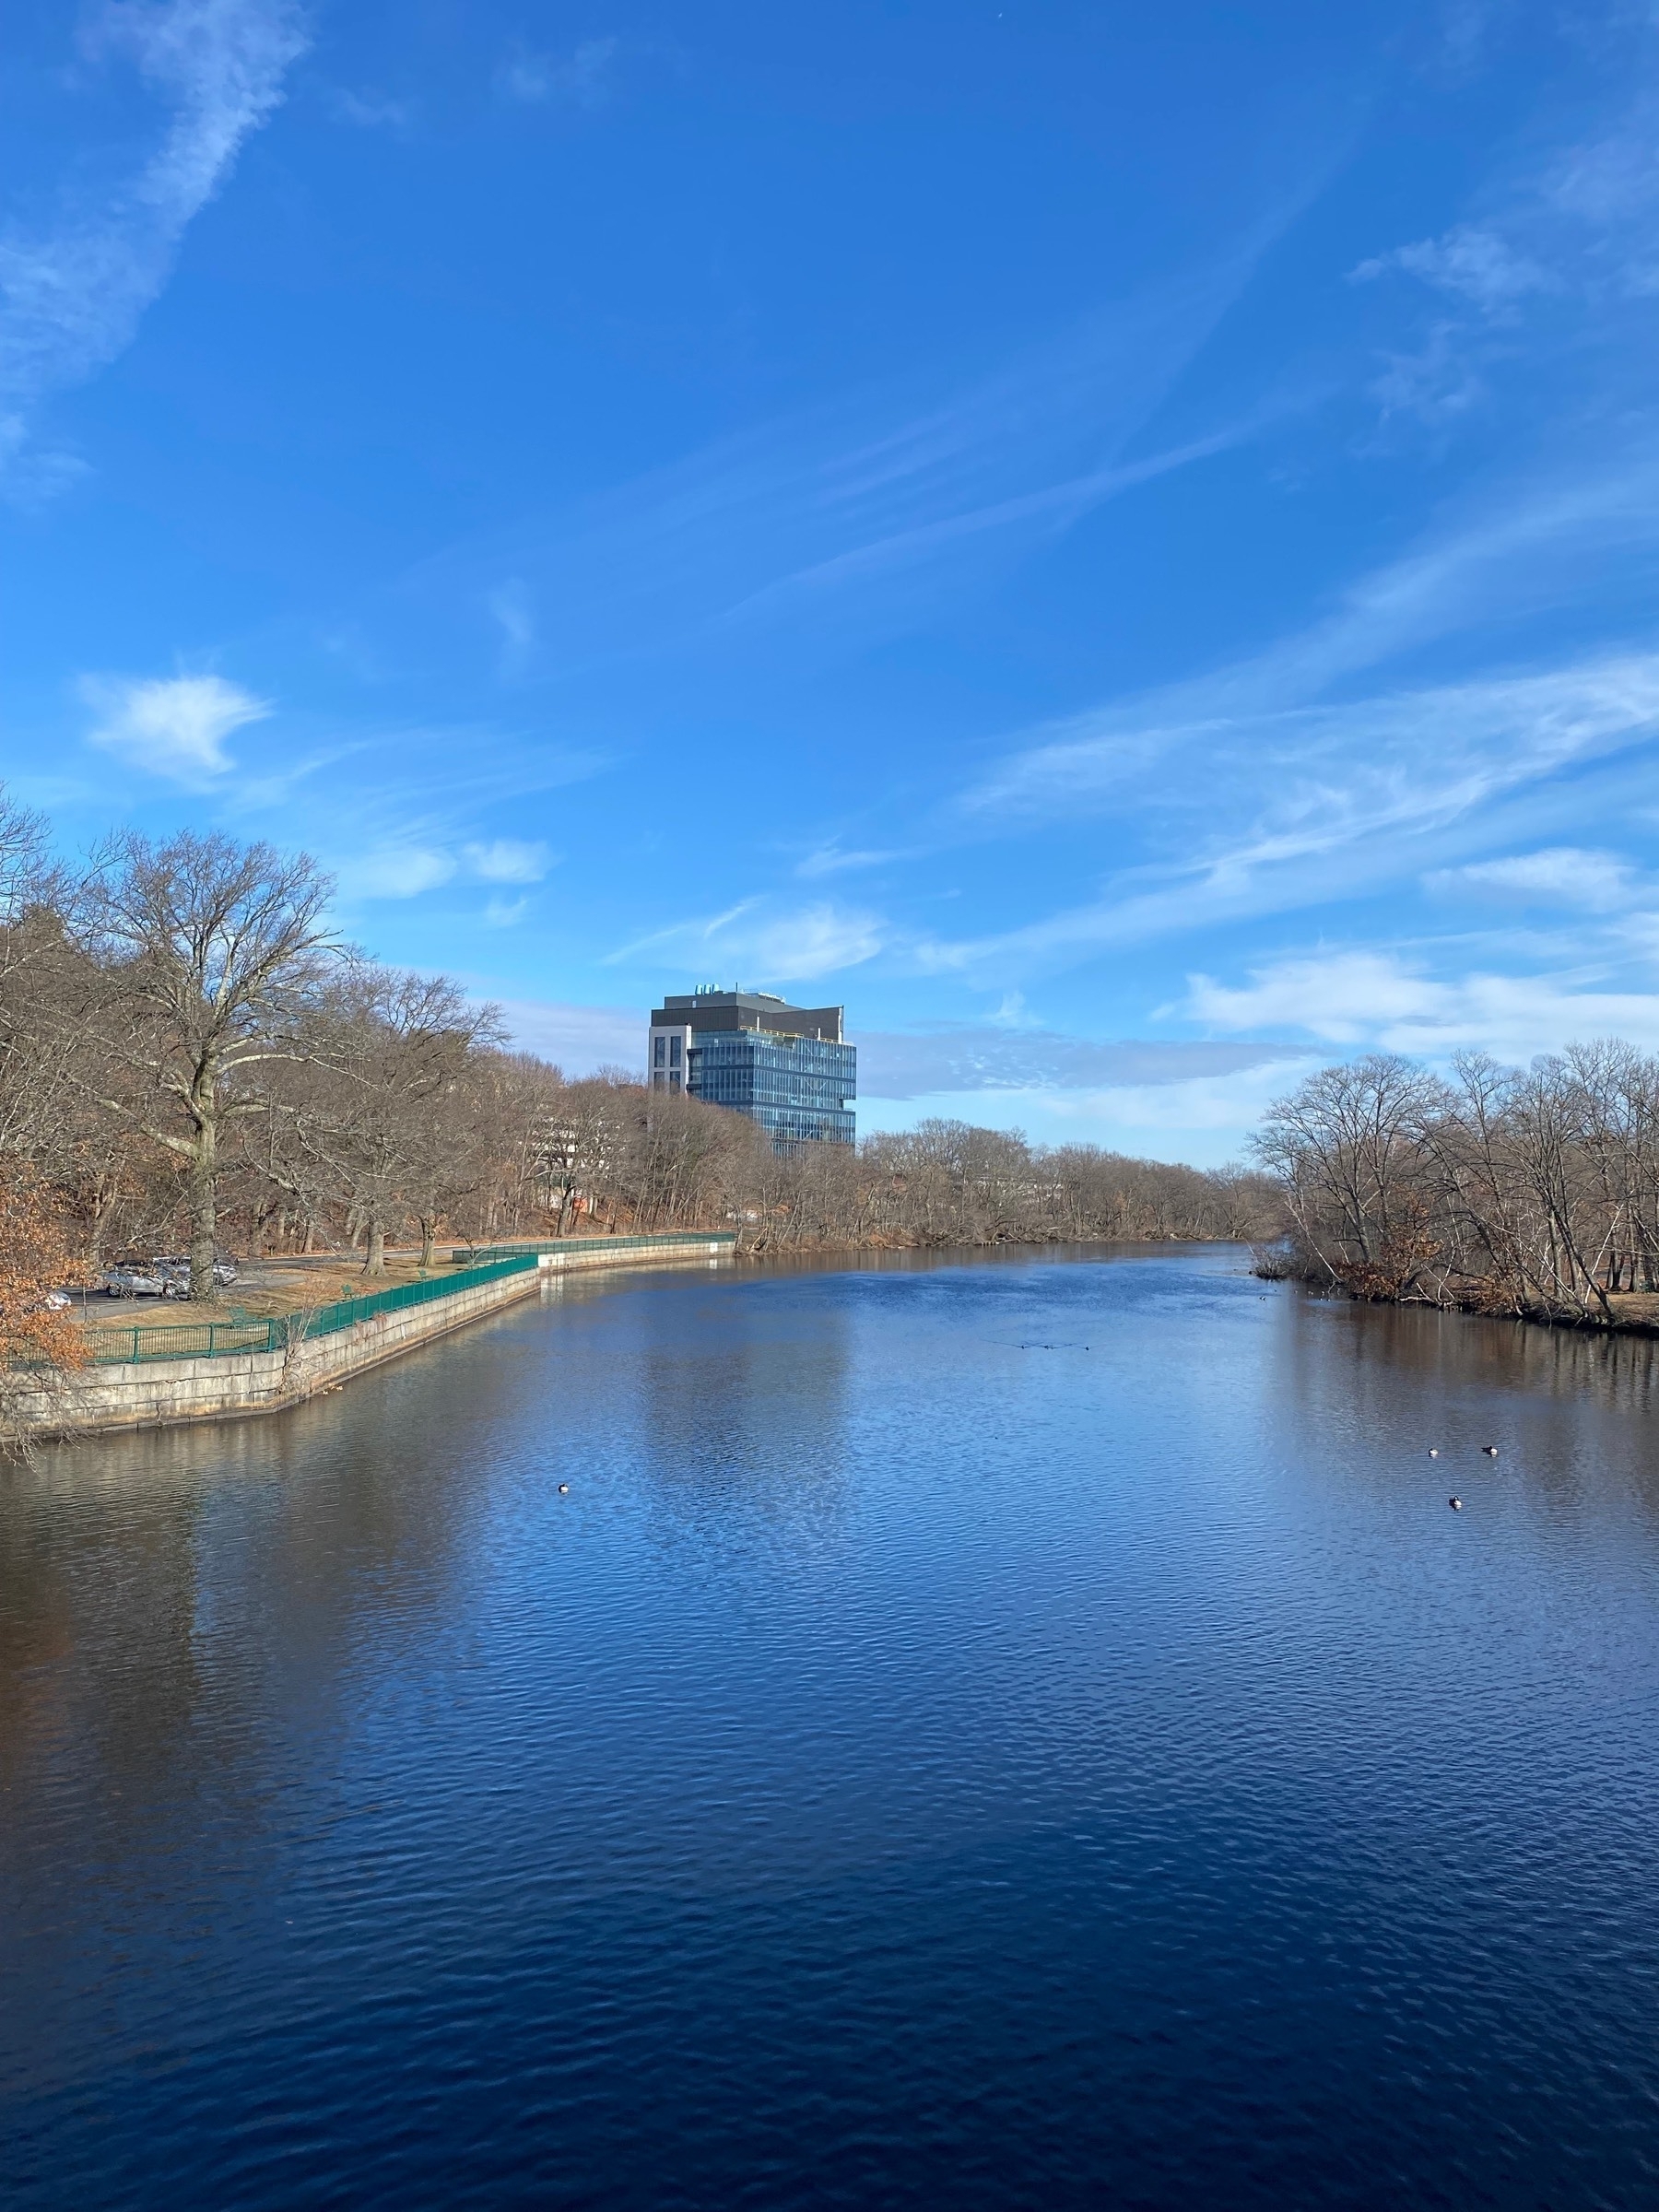 View of a tree lined river from a bridge, with the blue sky above and a glass windowed building on the far bank.